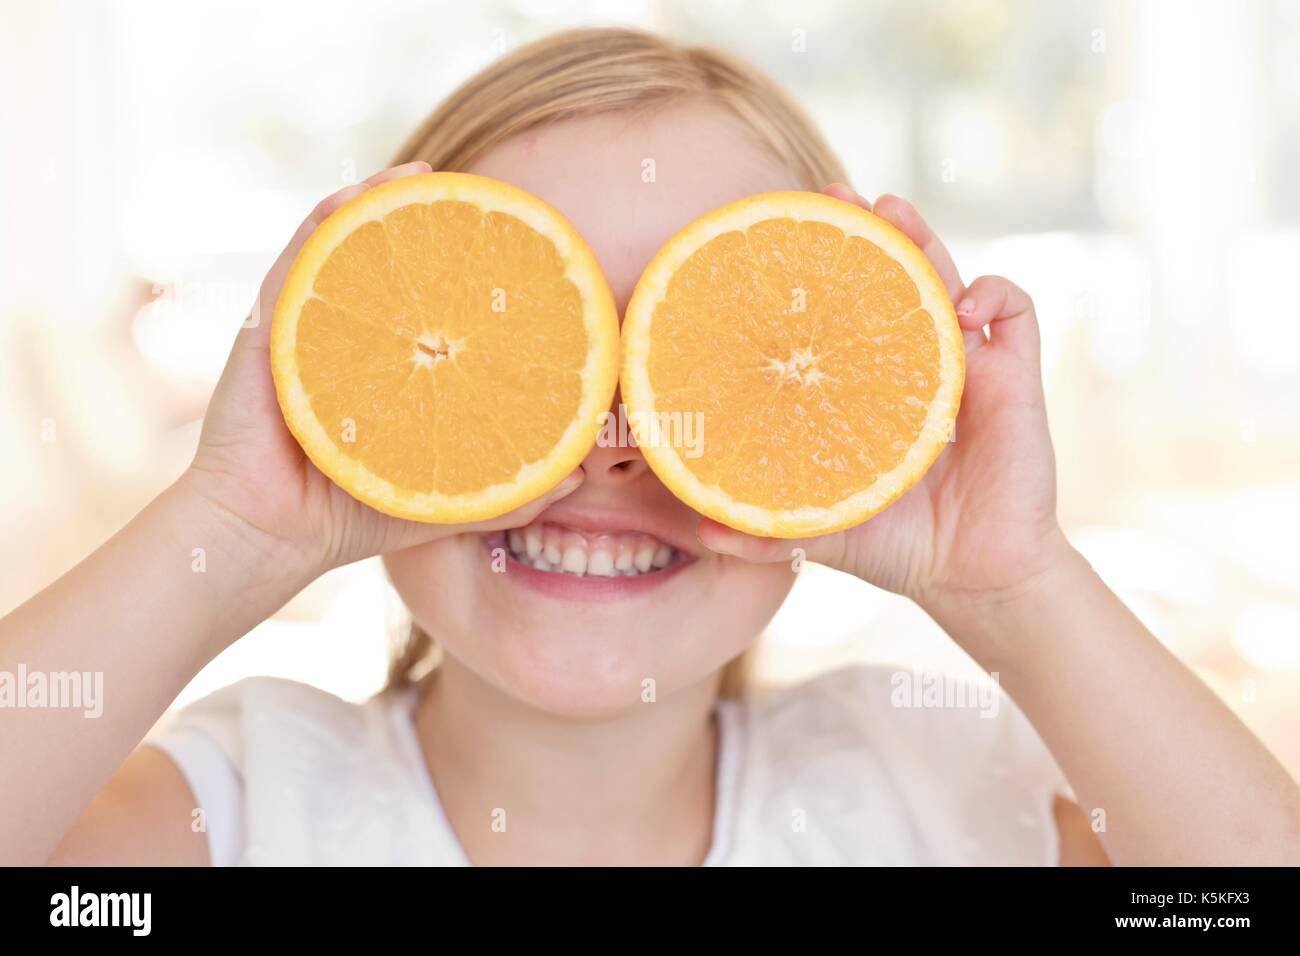 Young girl holding oranges over eyes. Stock Photo